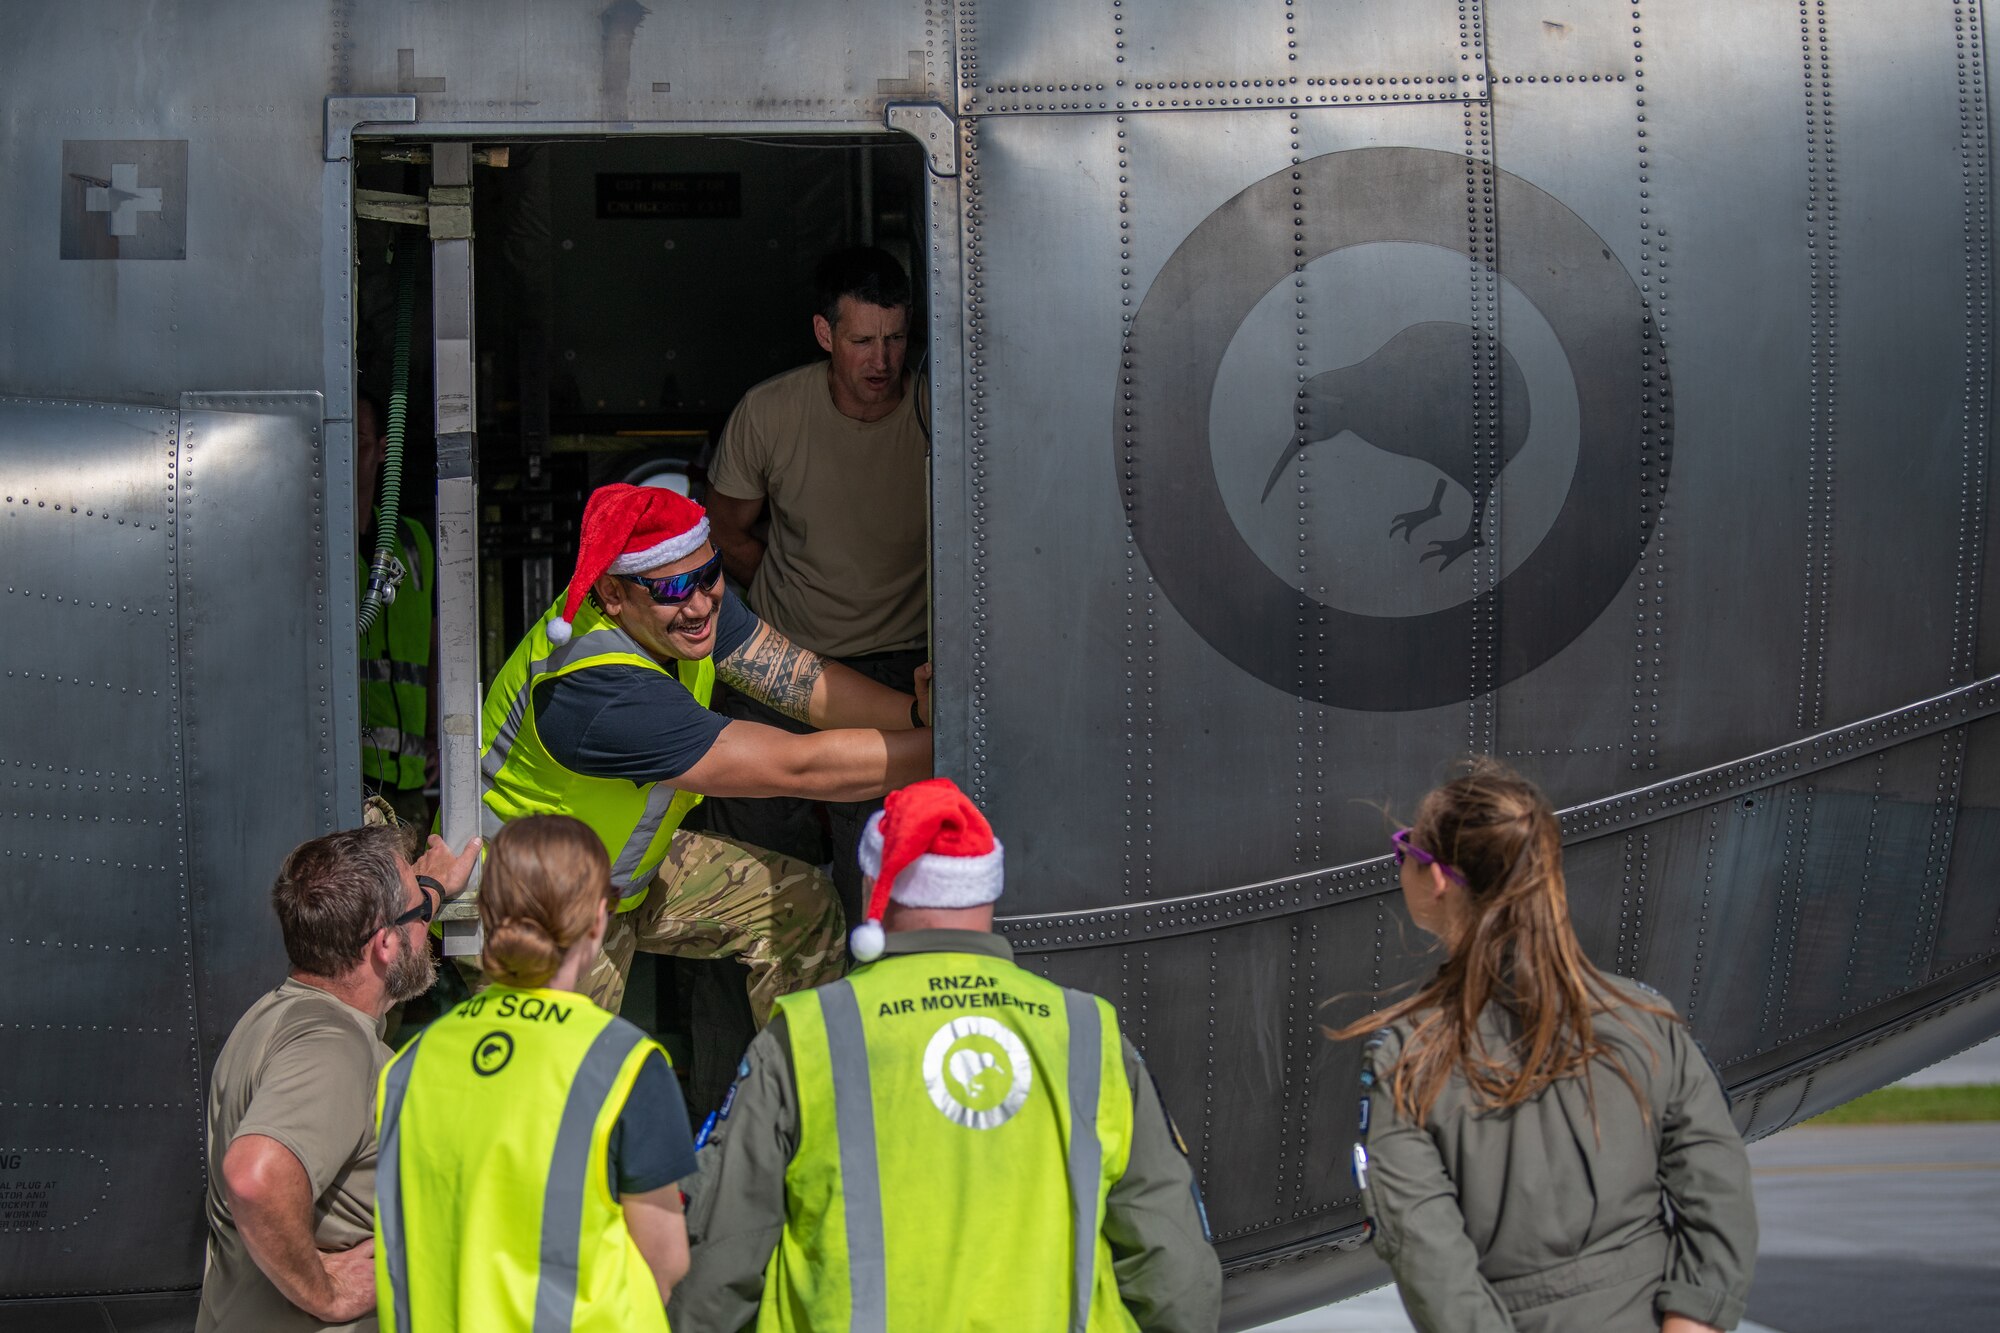 Members of the Royal New Zealand Air Force wear festive attire while hand cranking the loading ramp door of a C-130H Hercules close.